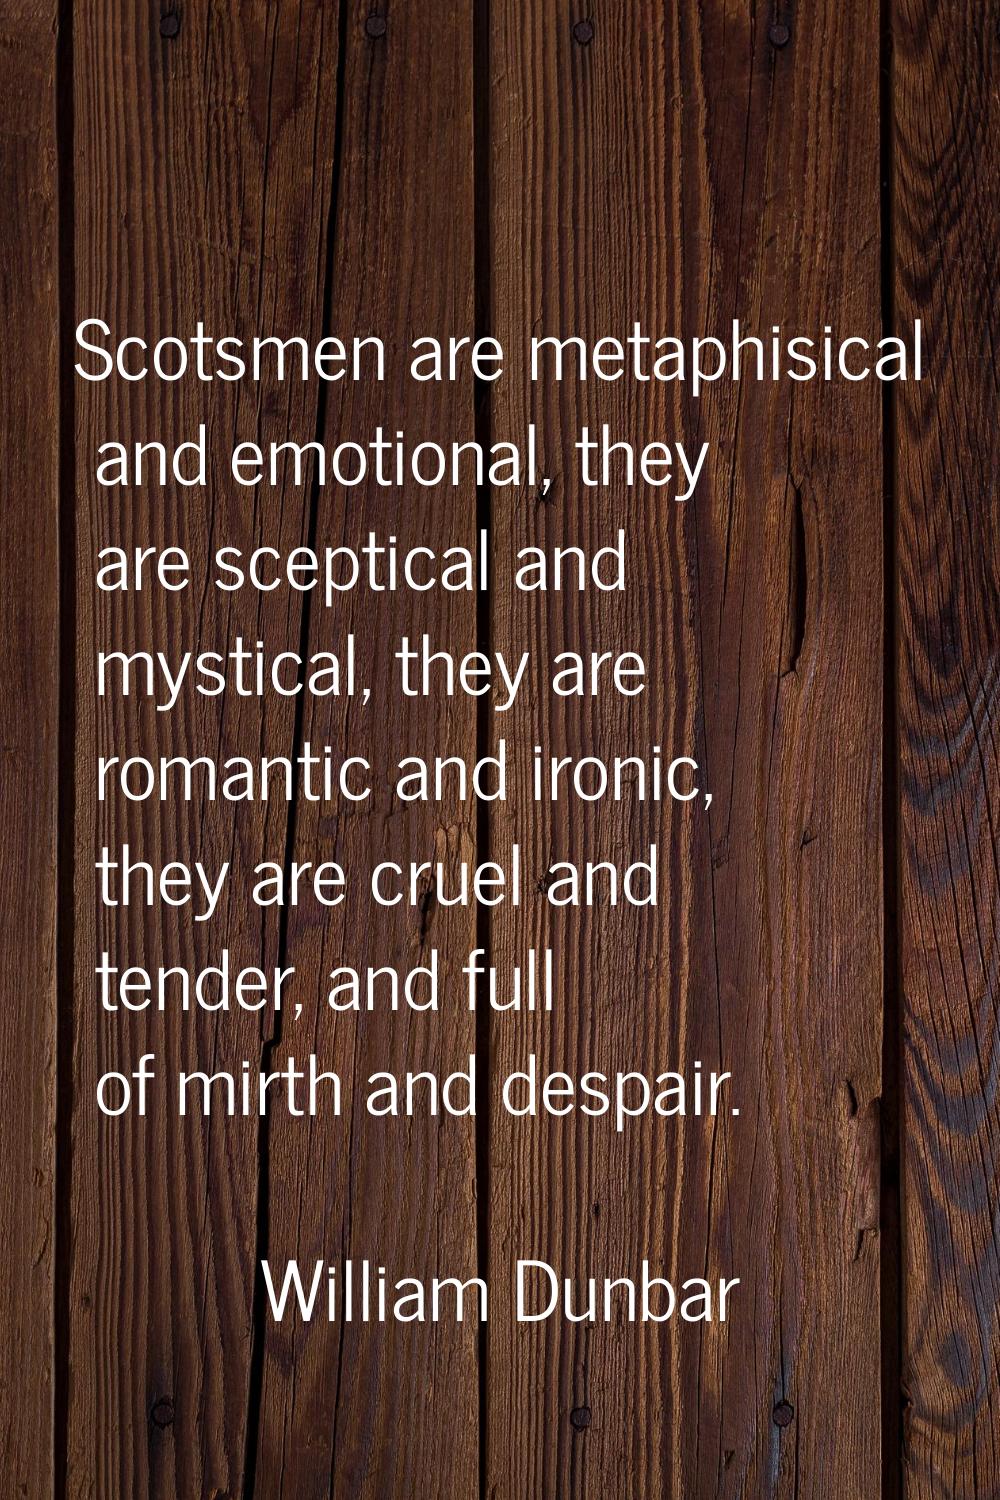 Scotsmen are metaphisical and emotional, they are sceptical and mystical, they are romantic and iro